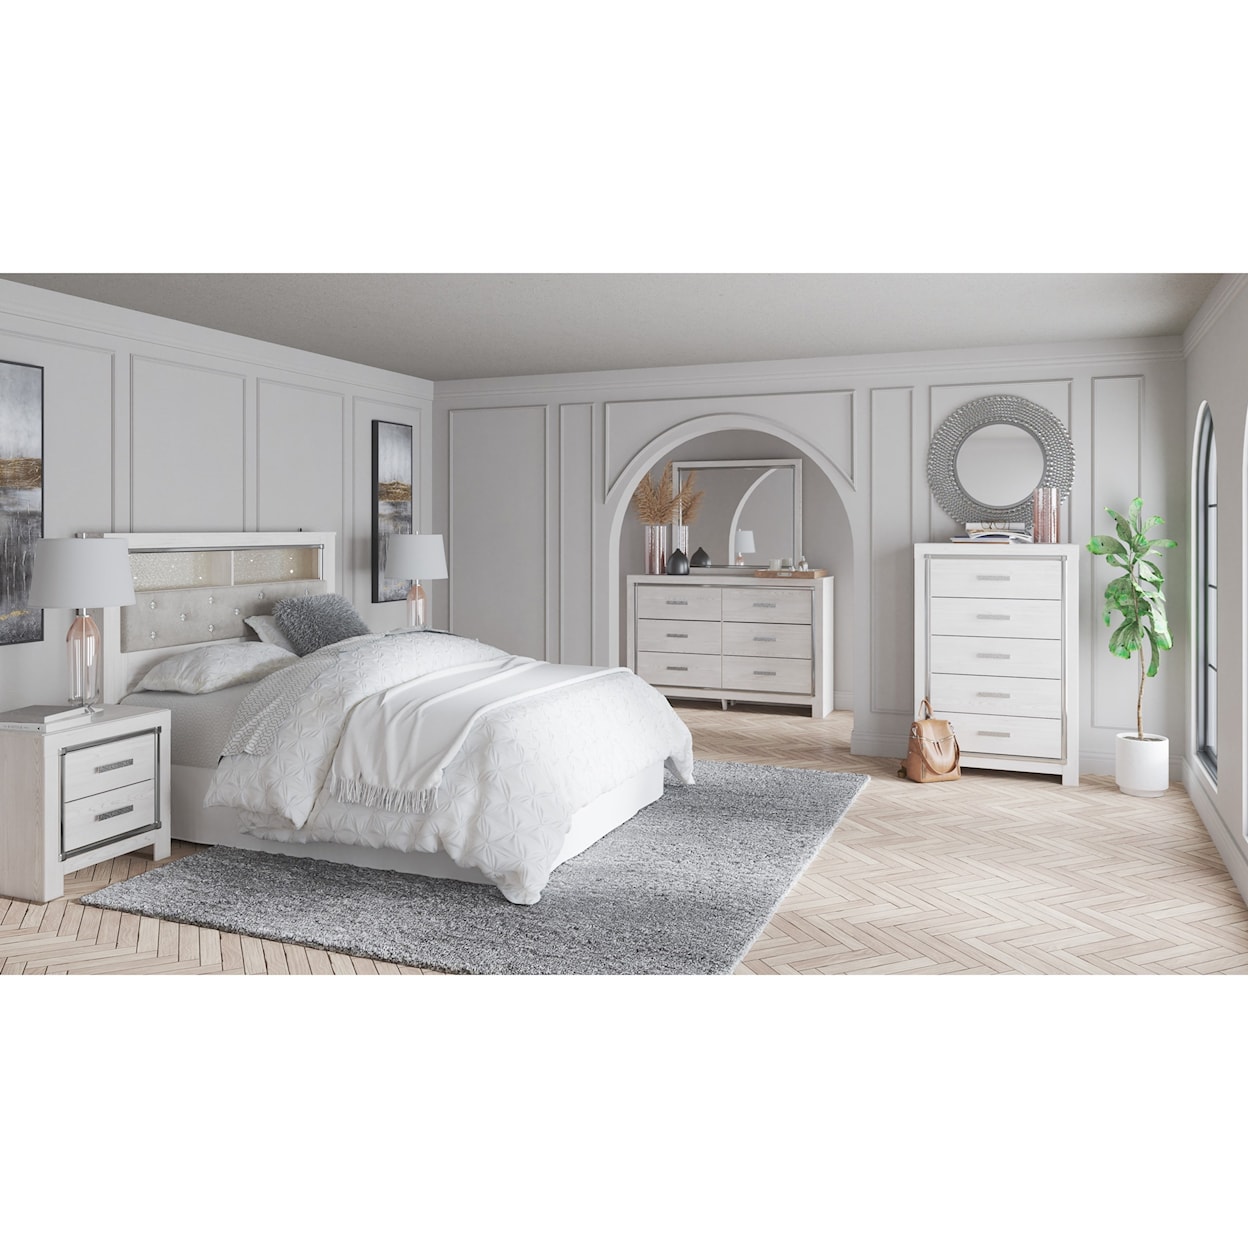 Signature Design by Ashley Altyra Queen Bedroom Group